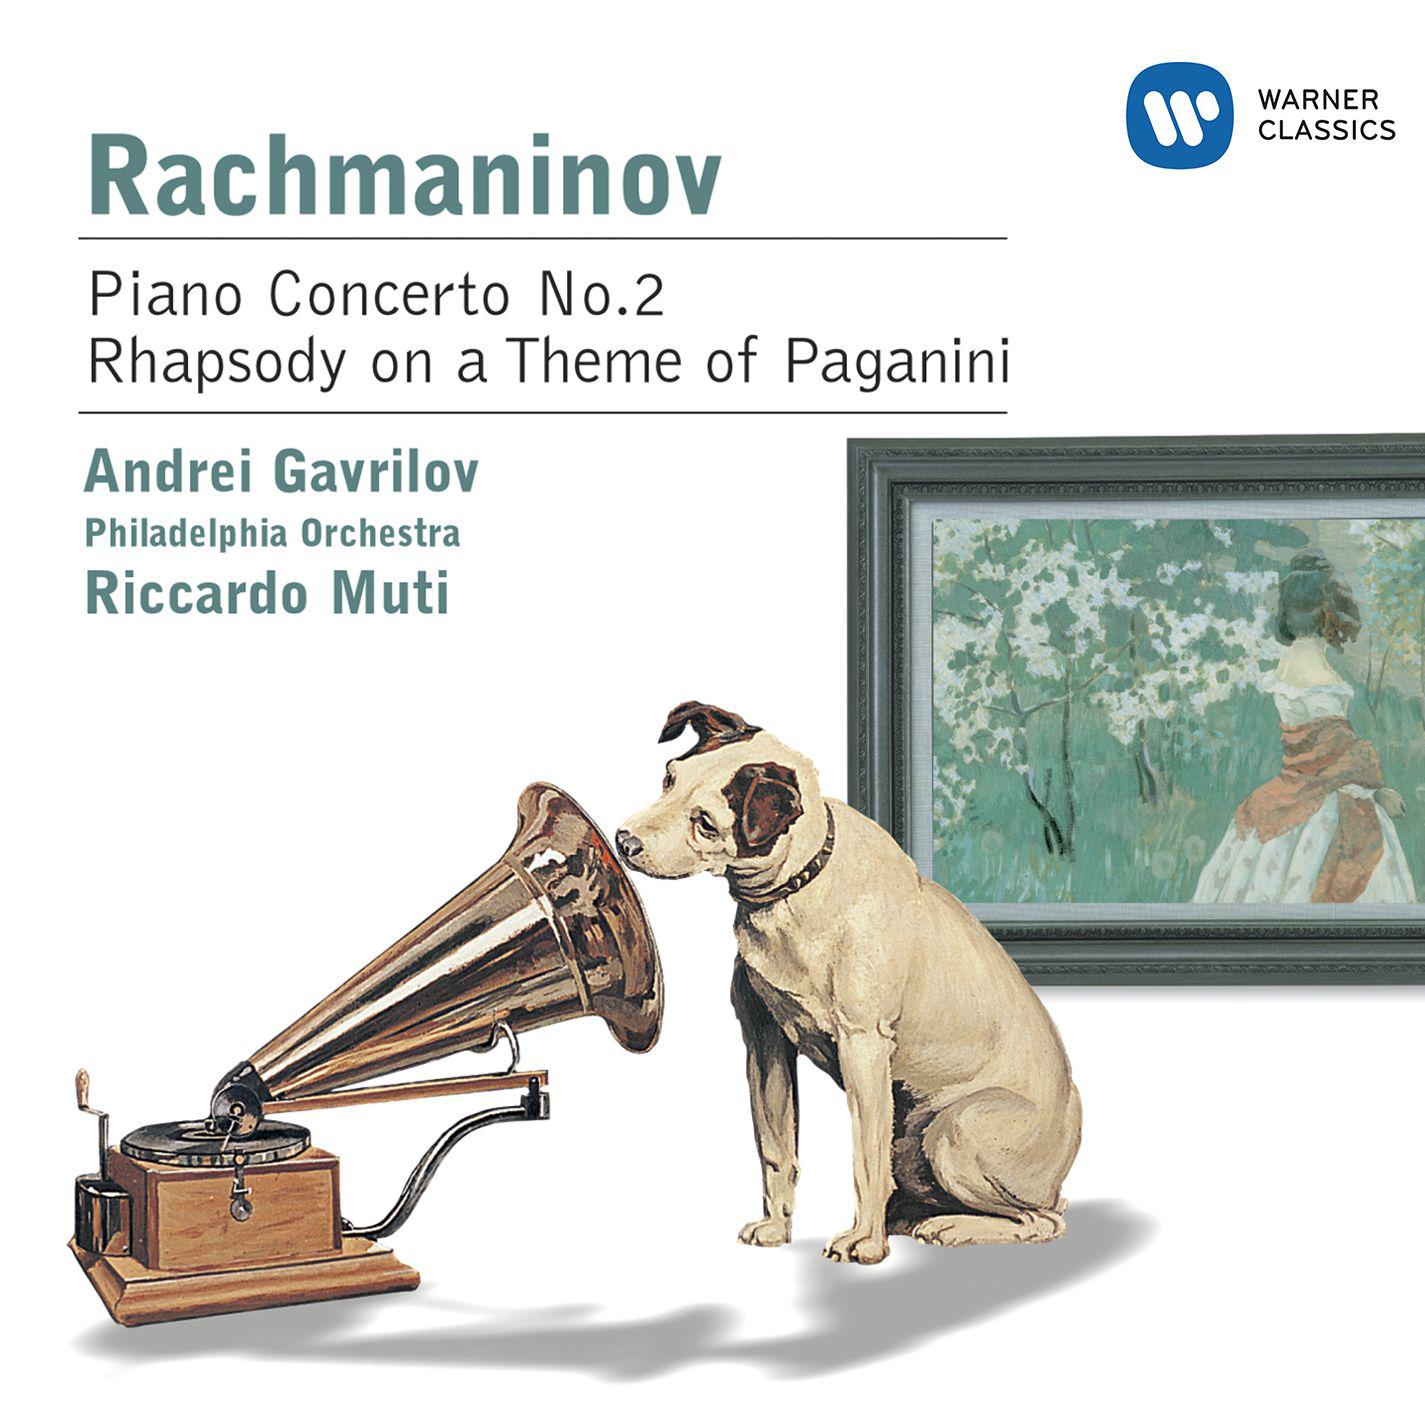 Rhapsody on a Theme of Paganini, Op. 43:Variation VIII. Tempo I